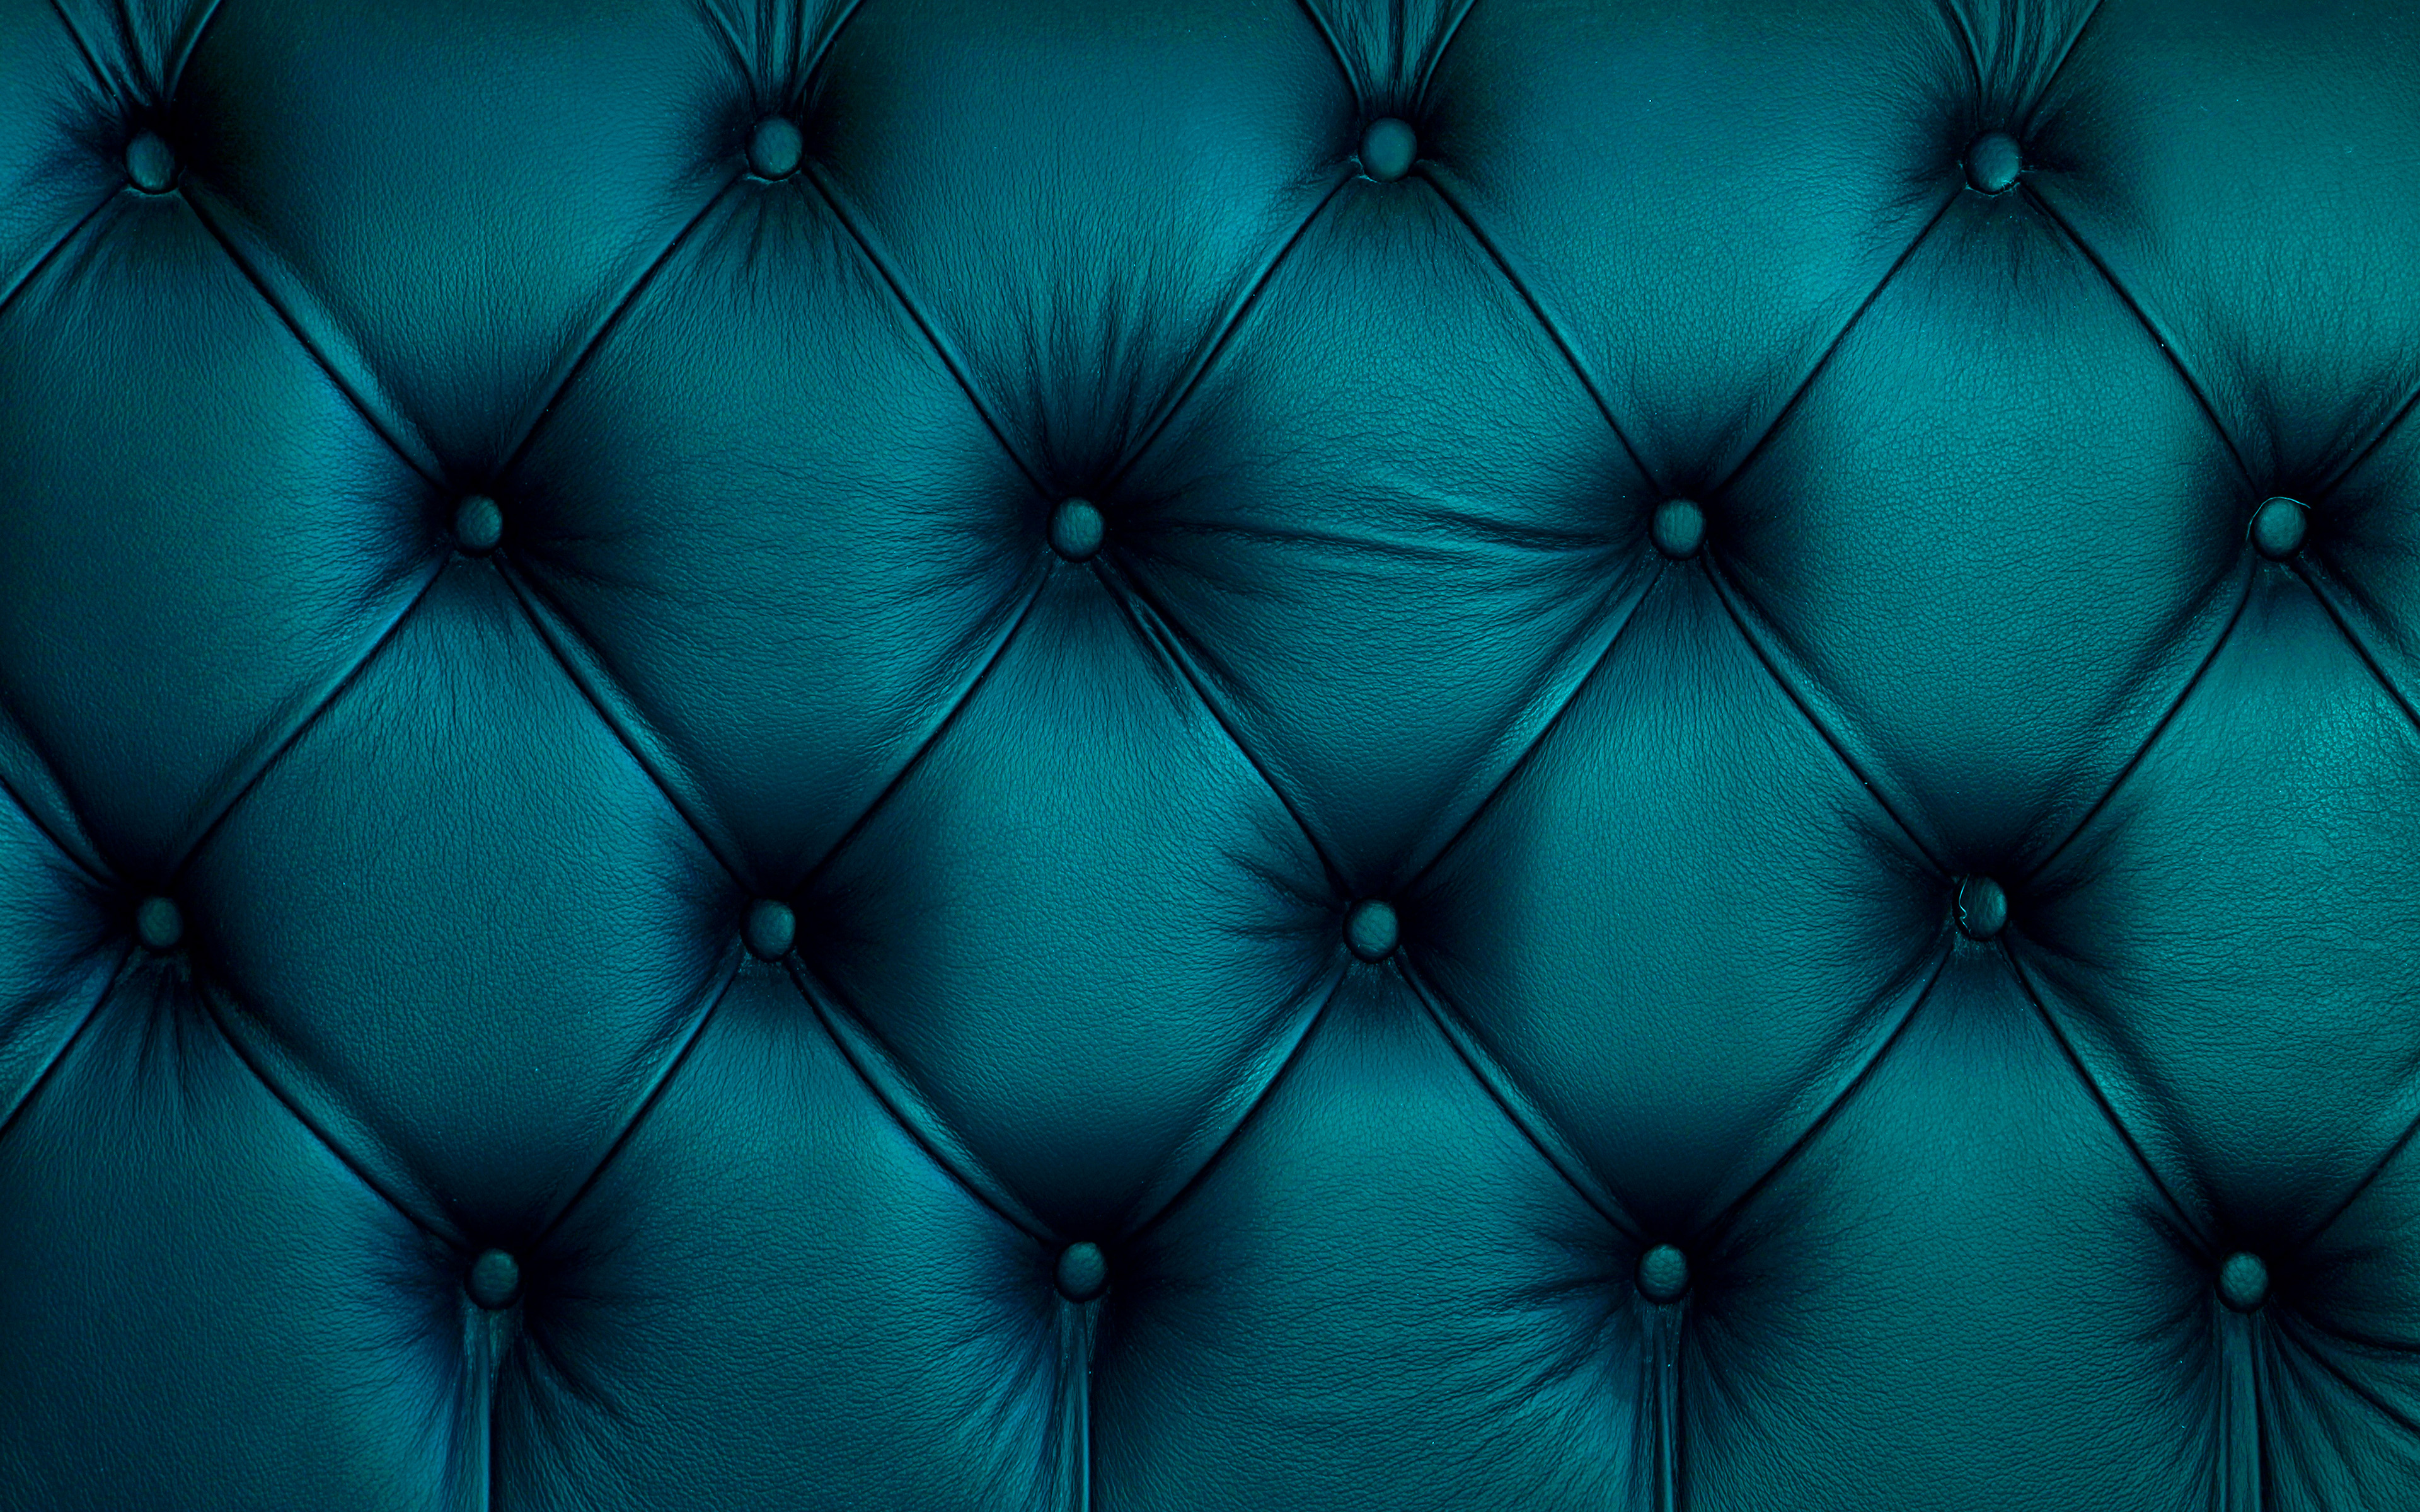 Download wallpaper blue leather upholstery, 4k, macro, blue leather, blue leather background, leather textures, blue background, upholstery textures for desktop with resolution 3840x2400. High Quality HD picture wallpaper